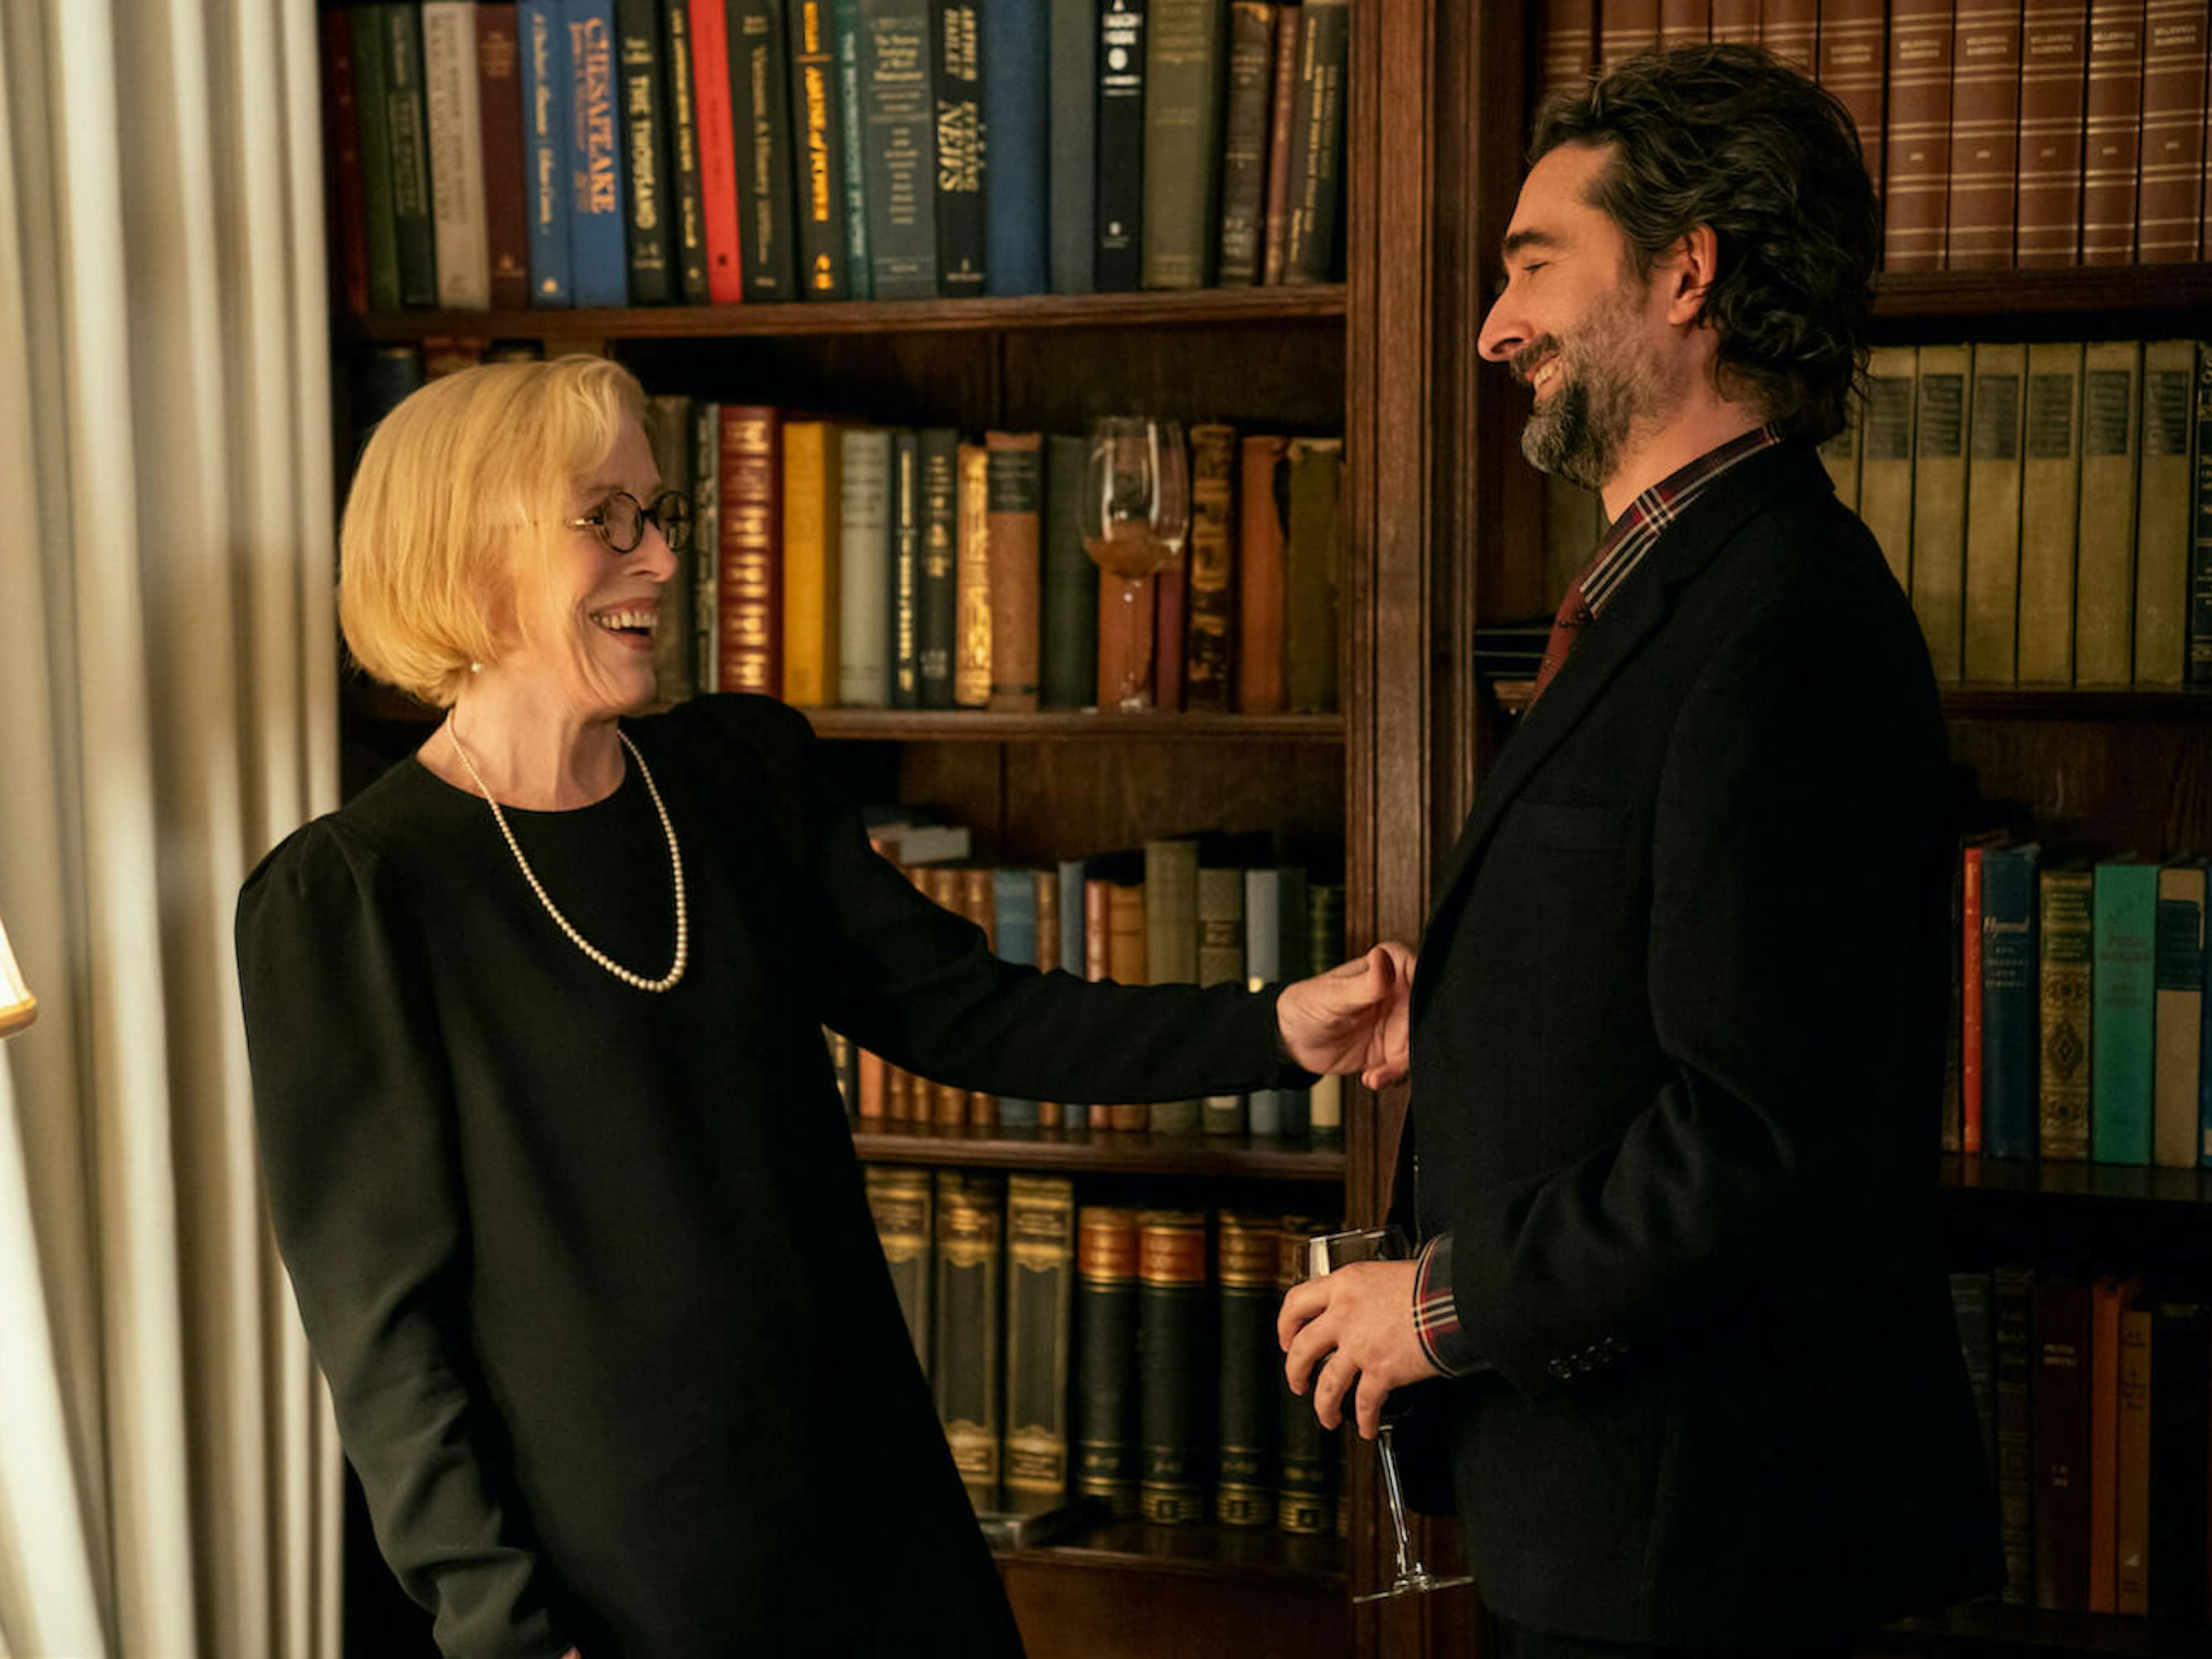 Professor Joan Hambling (Holland Taylor) and Bill Dobson (Jay Duplass) laugh together in all black garb. Behind them lay rows of old books. Duplass holds a glass of wine.